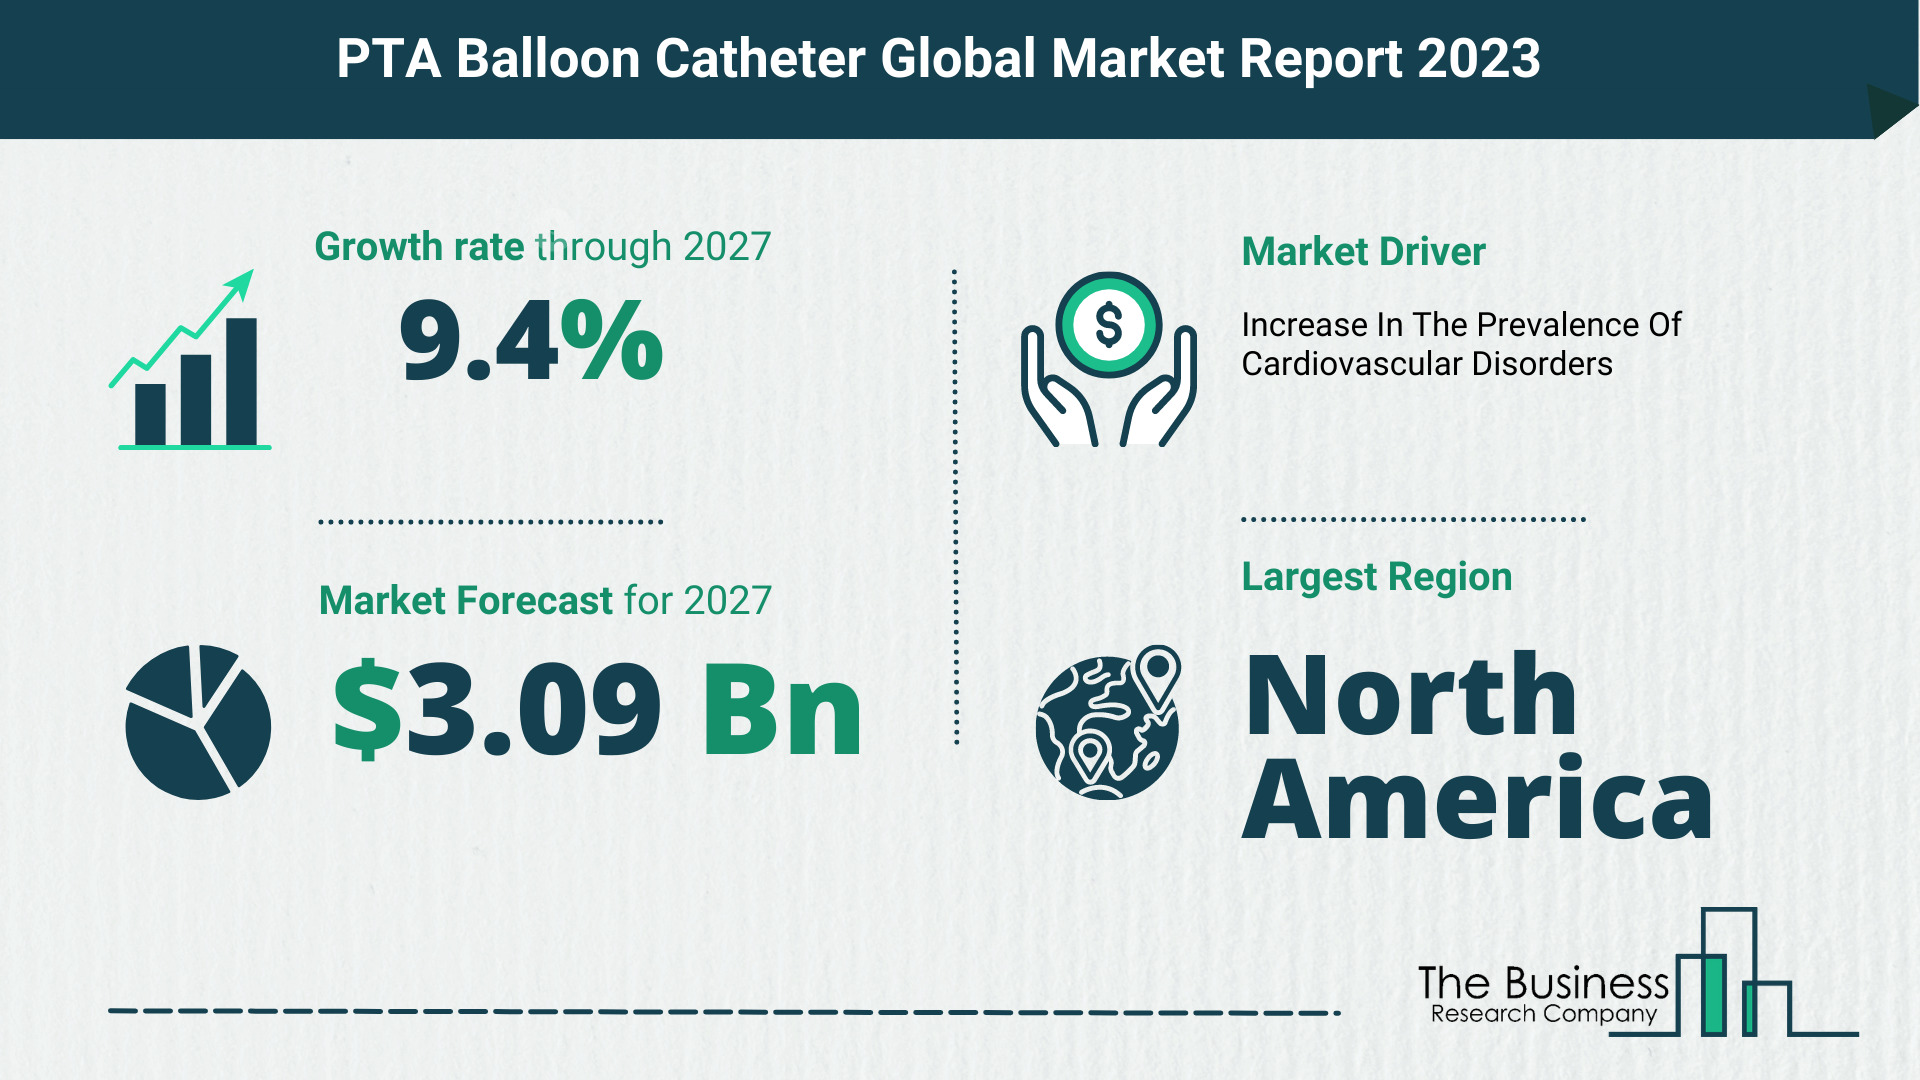 PTA Balloon Catheter Market Size, Share, And Growth Rate Analysis 2023